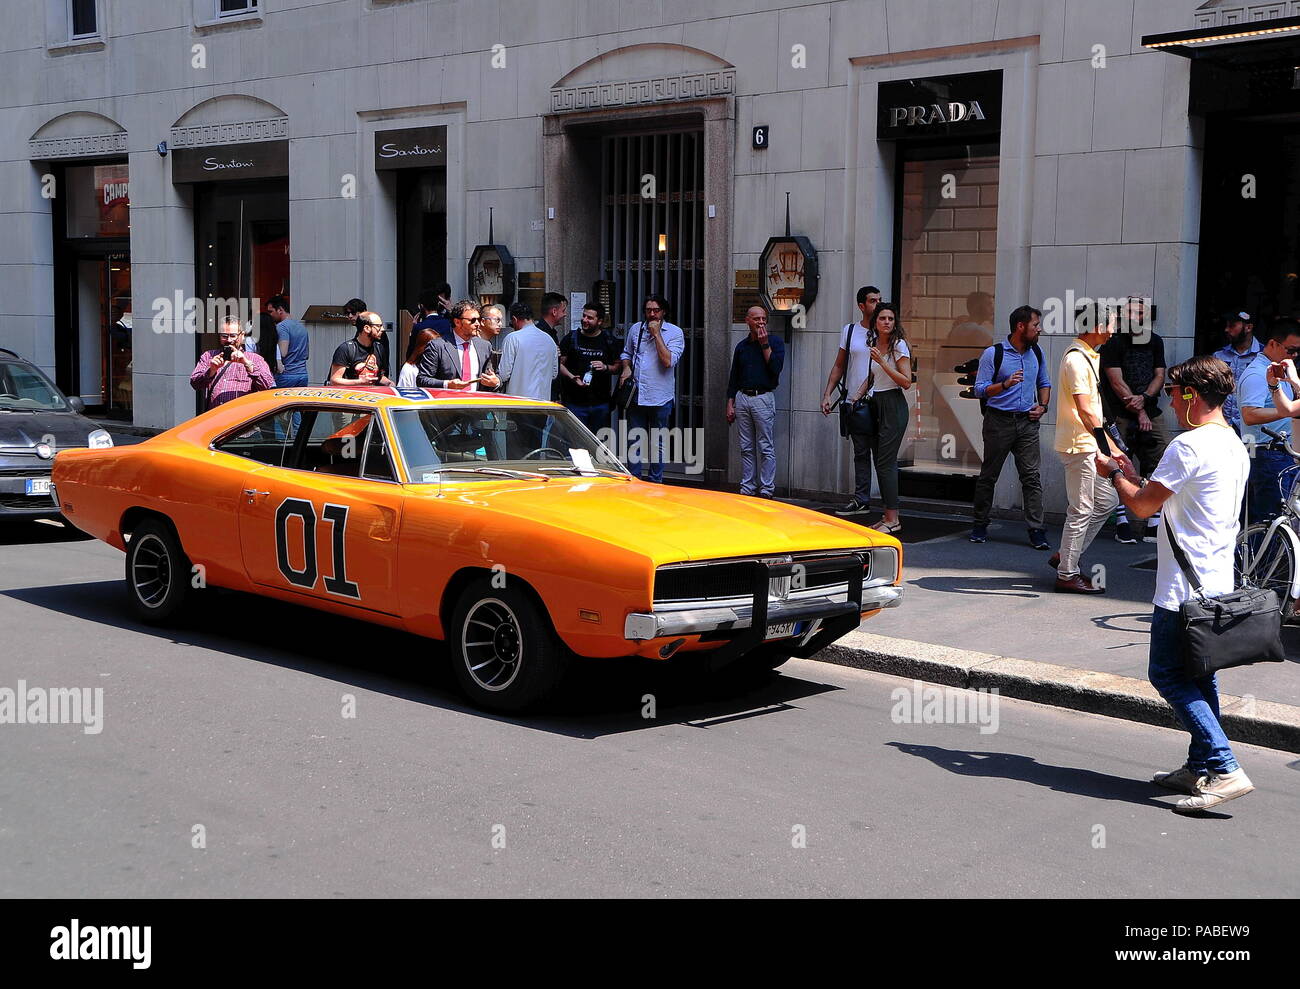 A replica of the famous 'General Lee' 1969 Dodge Charger car driven in the television series The Dukes of Hazzard received a parking ticket whilst being parked in Milan, Italy. Passersby took pictures with the car as it was parked on Via Monte Napoleone, an upscale shopping street in the city.  Featuring: General Lee Where: Milan, Italy When: 20 Jun 2018 Credit: IPA/WENN.com  **Only available for publication in UK, USA, Germany, Austria, Switzerland** Stock Photo